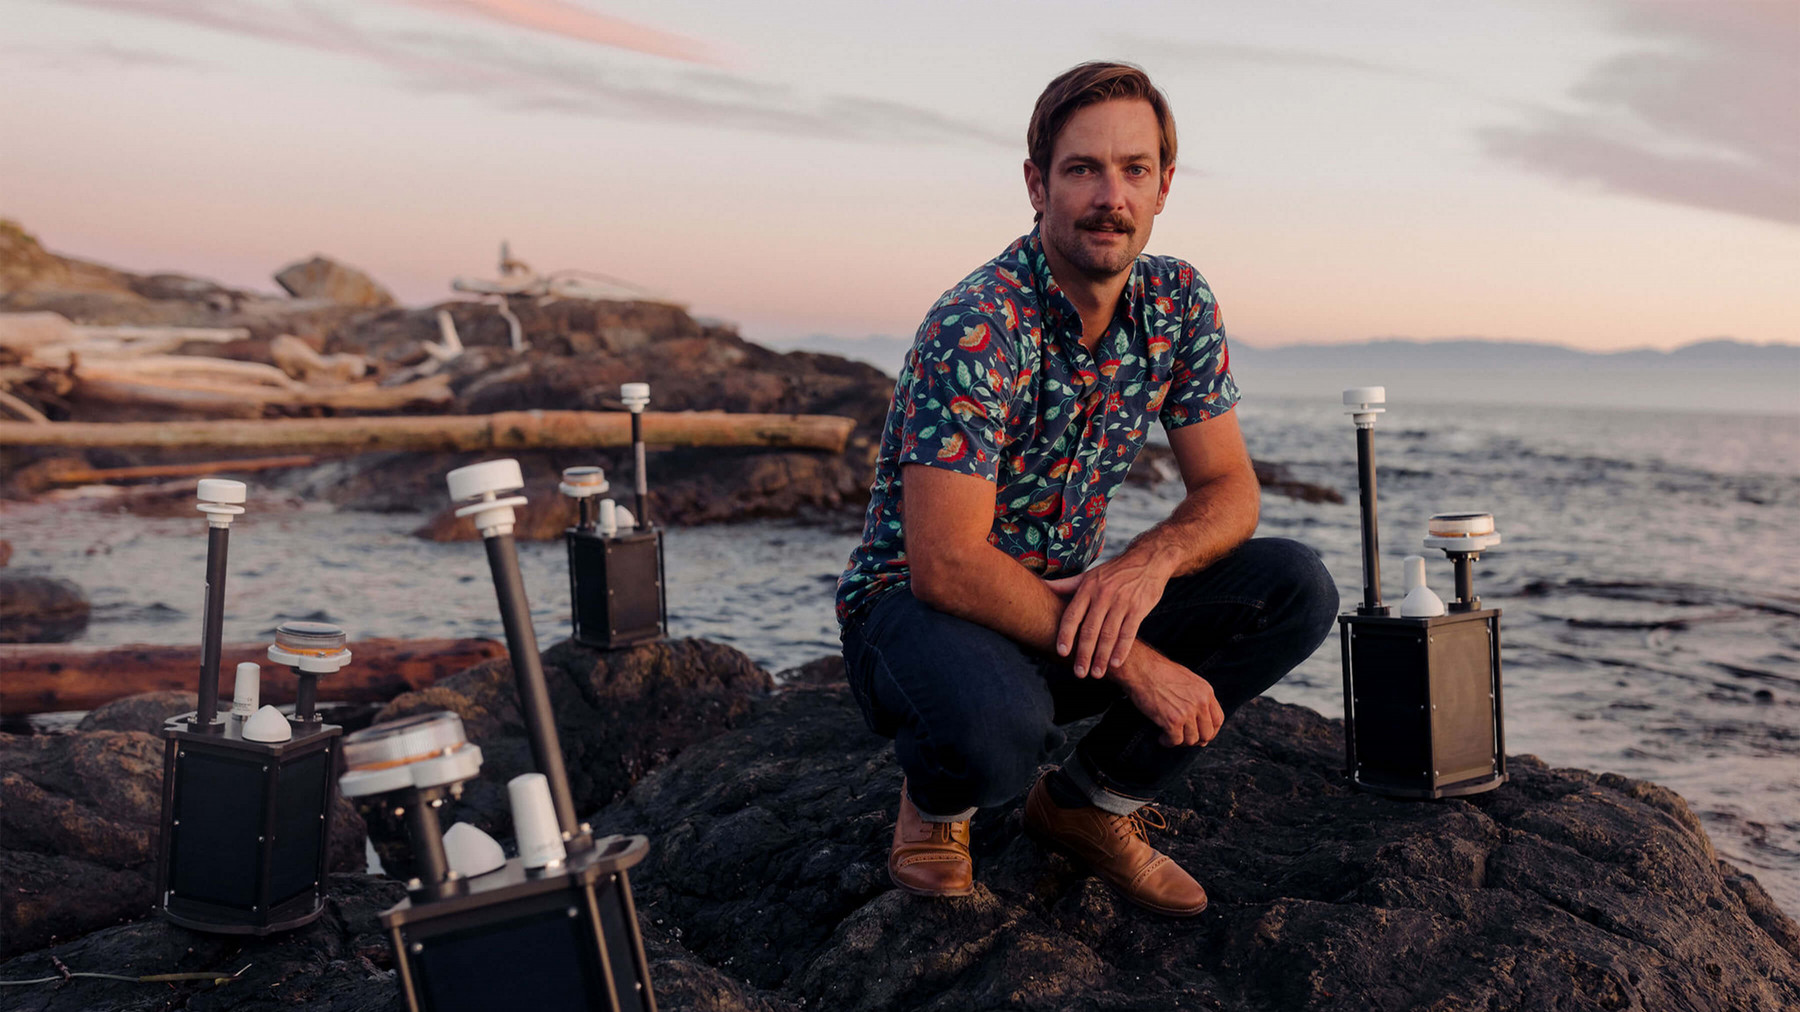 Man with a moustache and colourful short sleeve shirt crouching on a shoreline amongst electronic buoys. 